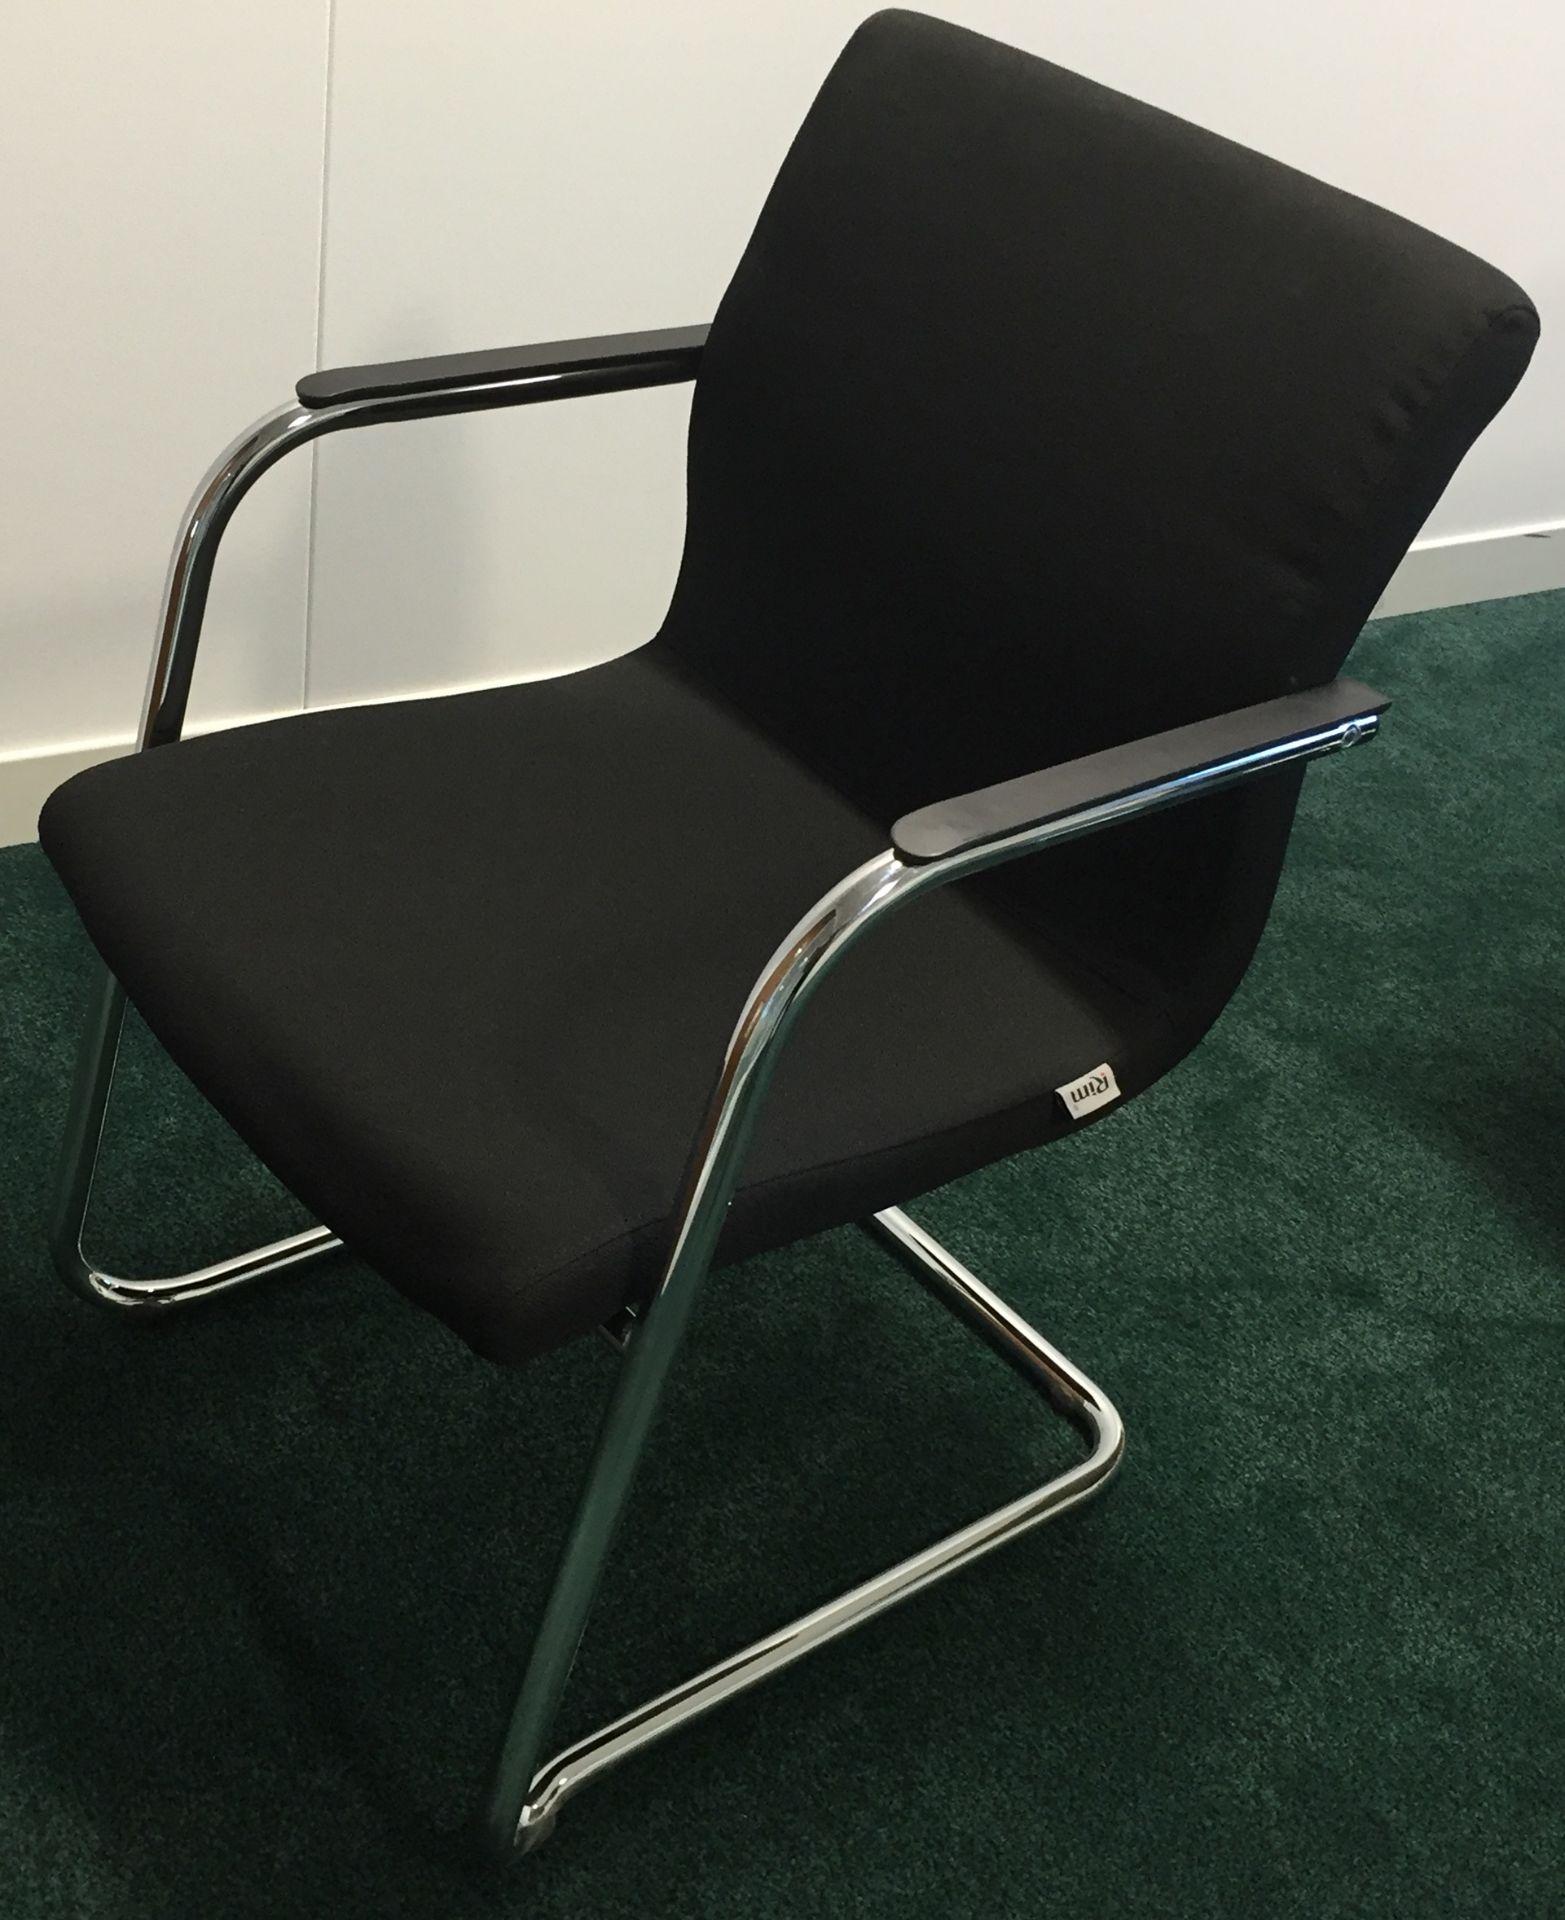 1 x Designer RIM Office Chair - Suitable For Desk Use, Meeting Tables or Conference Rooms - Features - Image 6 of 6